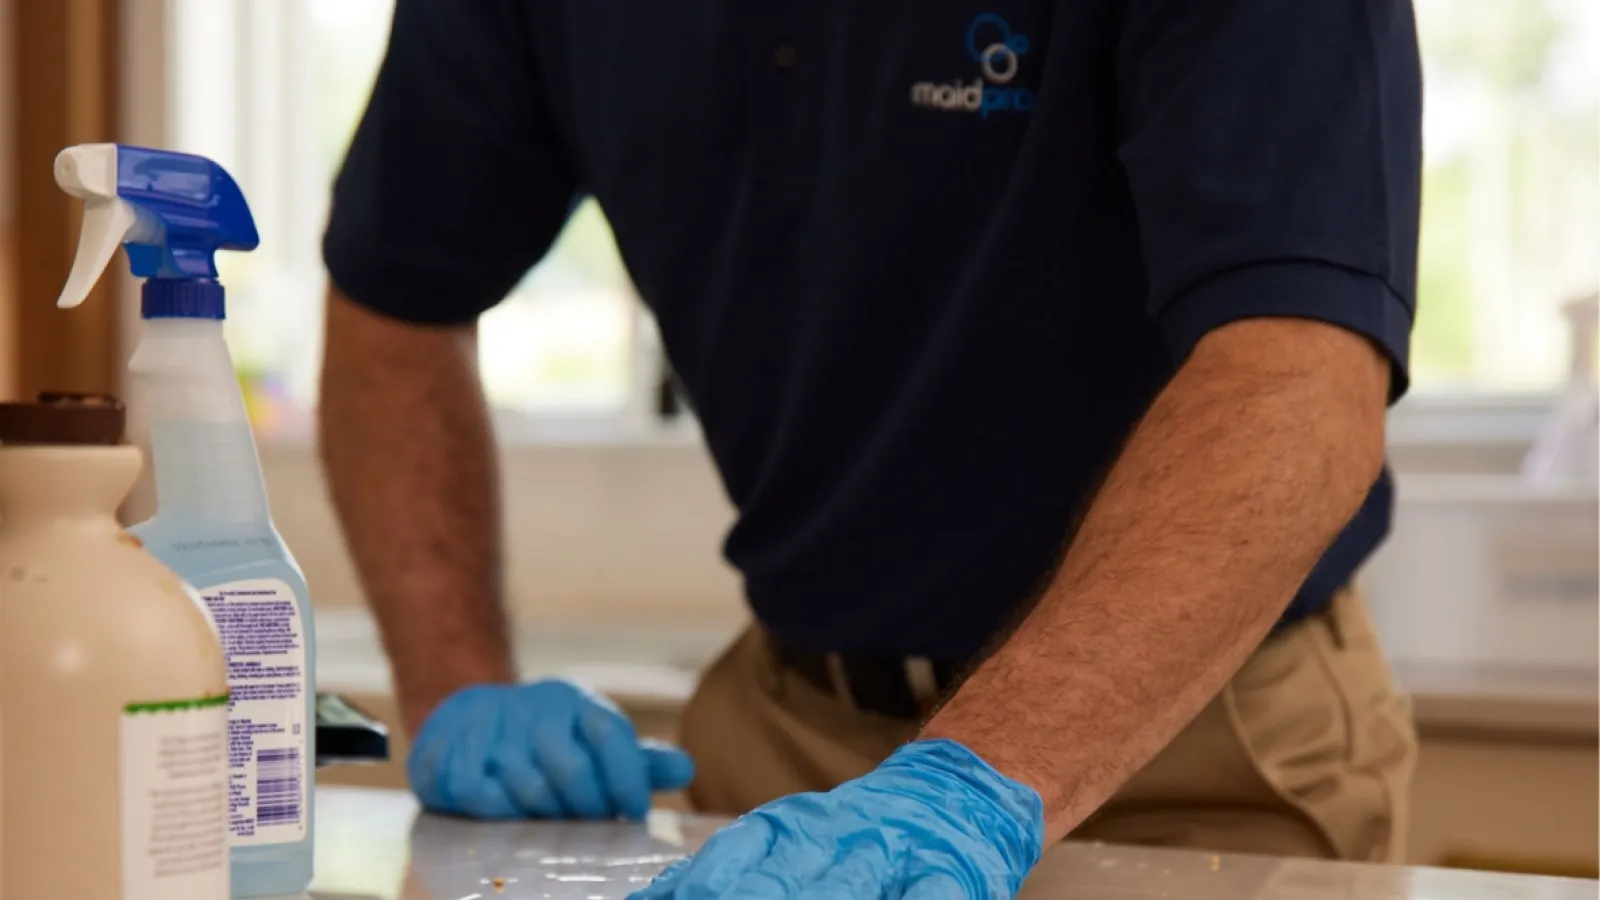 a man wearing gloves and a blue shirt working on a piece of paper